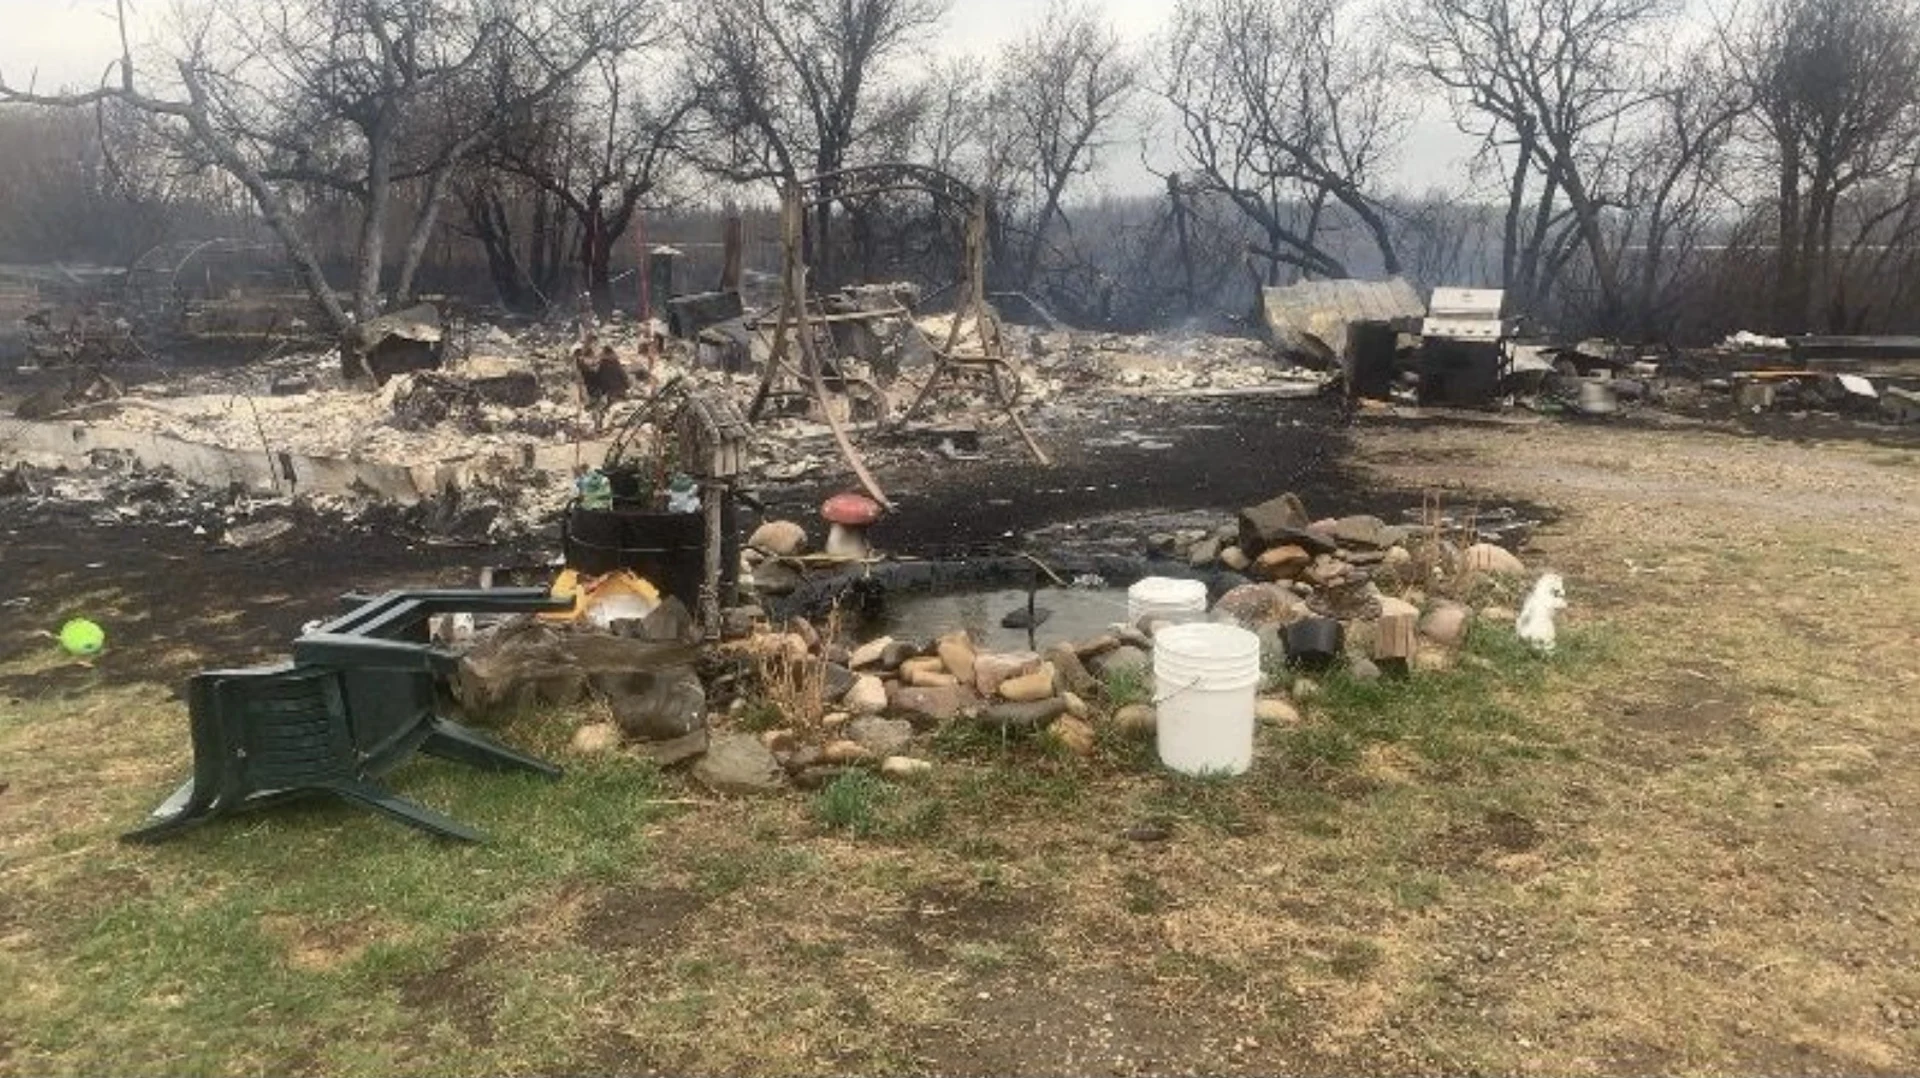 Alberta wildfire damage/Connor O'Donovan/The Weather Network